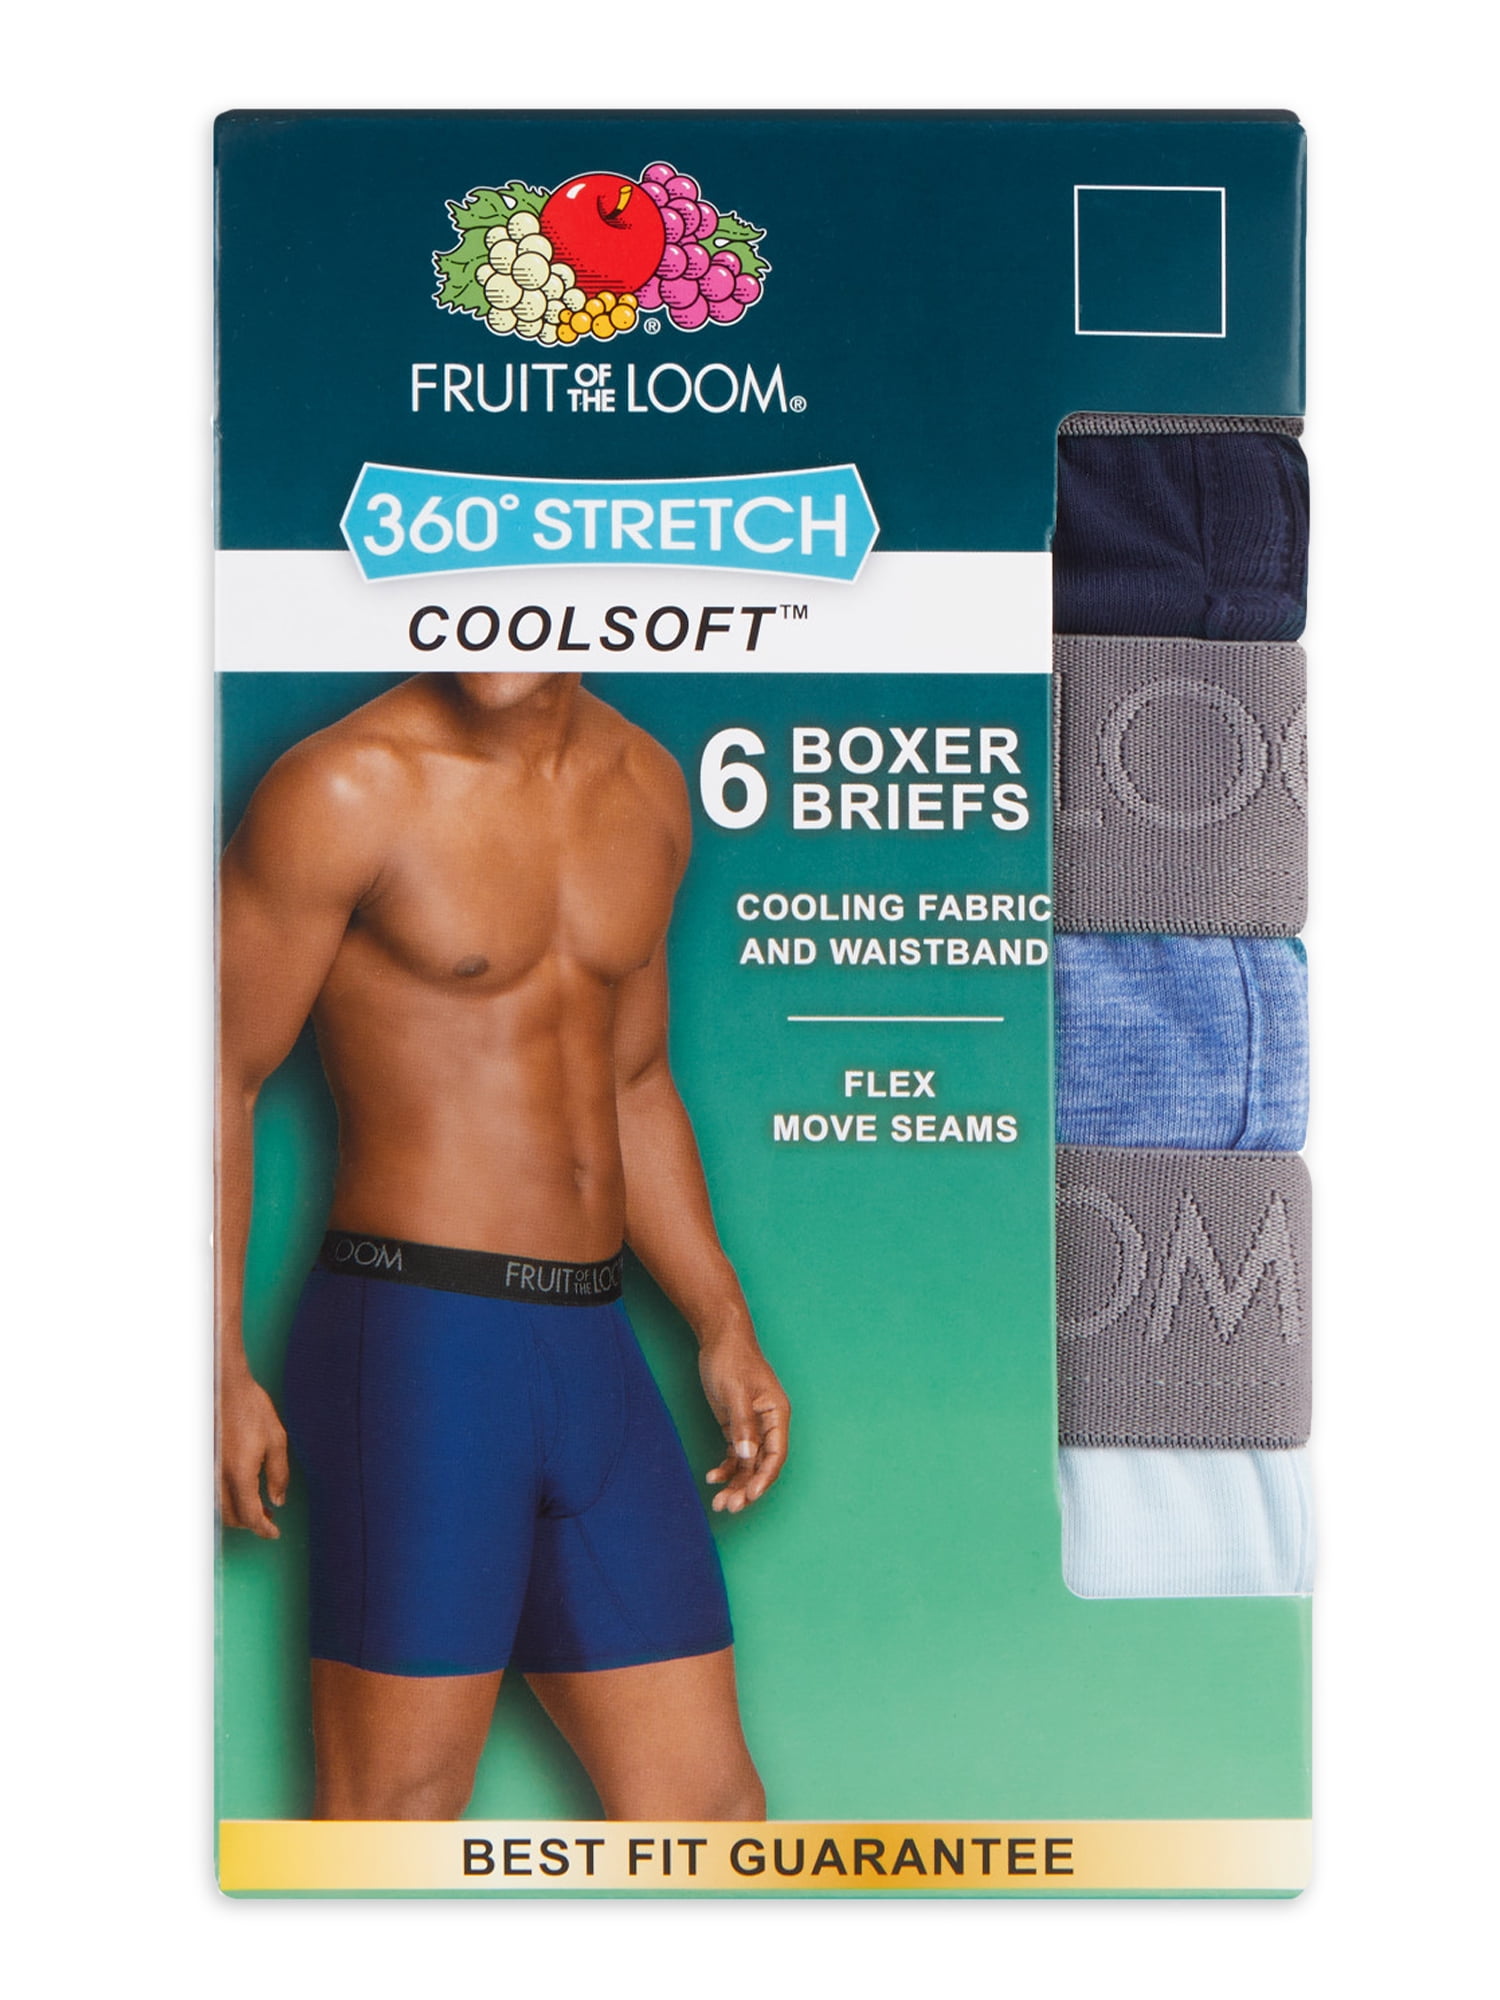 Fruit of the Loom Men's 360 Stretch Coolsoft Boxer Briefs, 6 Pack 